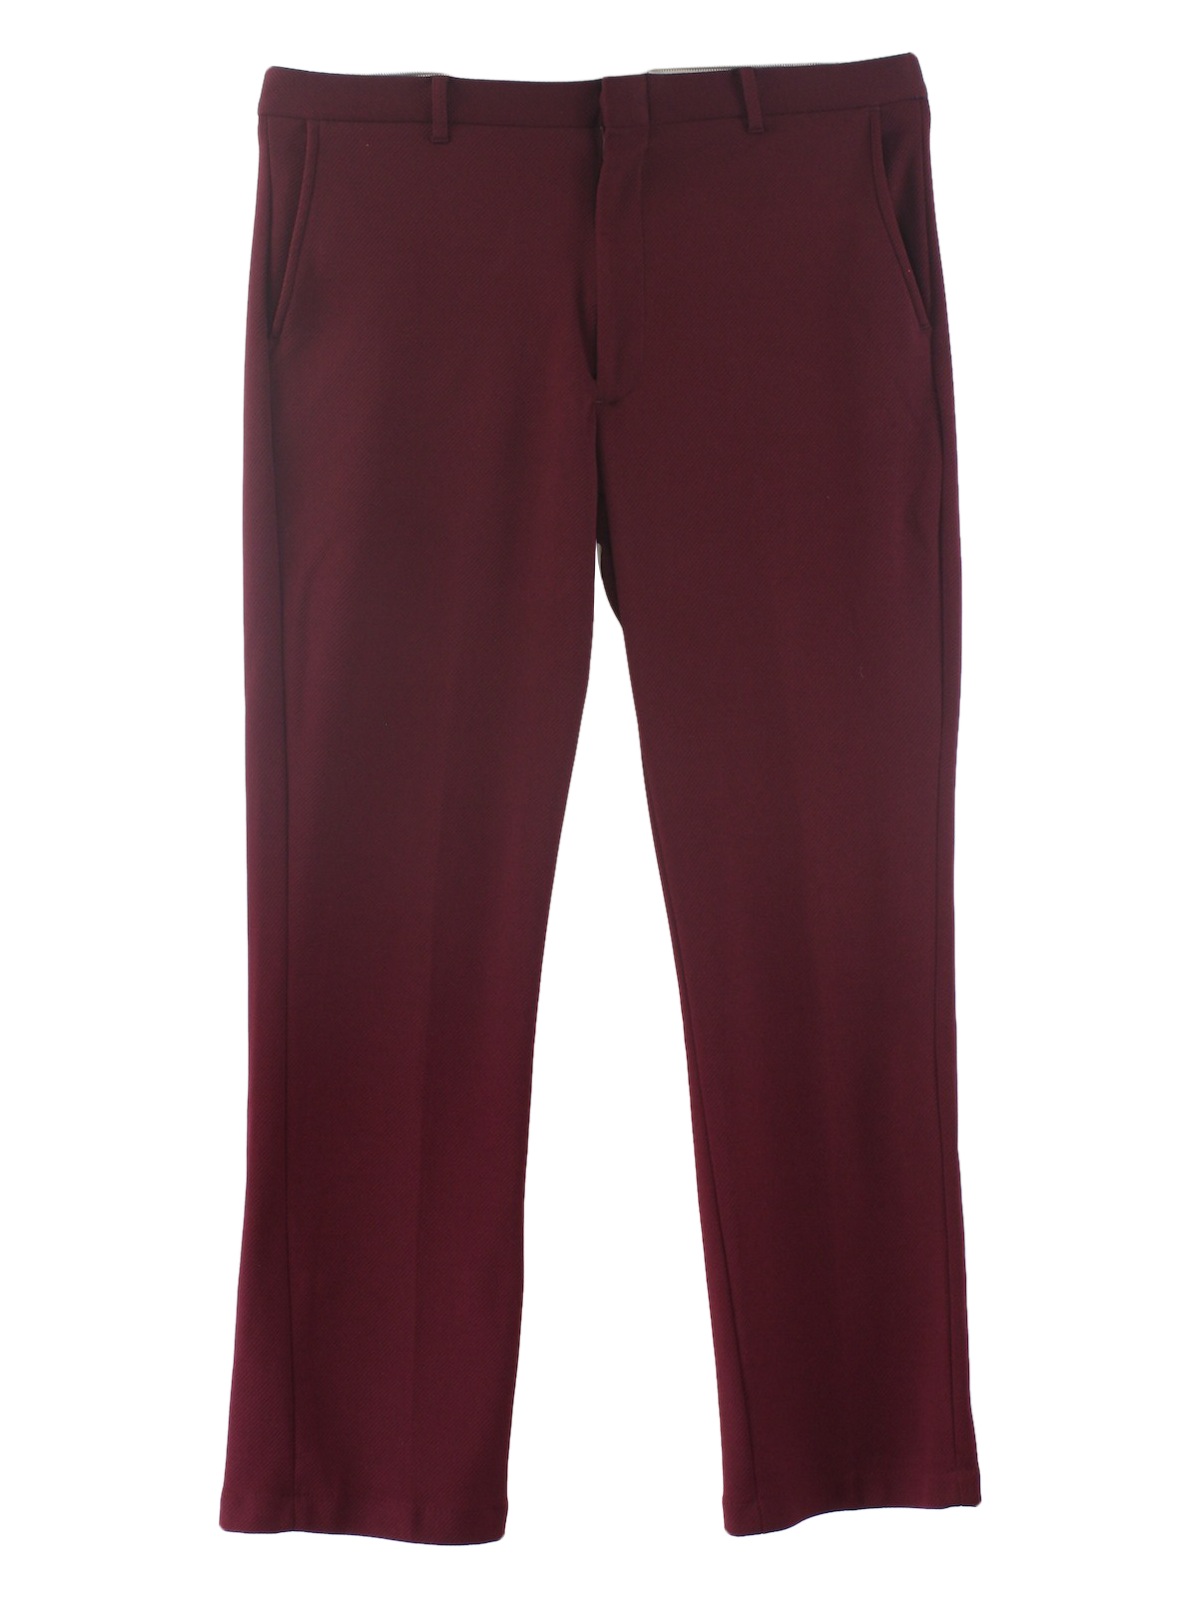 80's Vintage Pants: 80s -Haband- Mens maroon solid colored polyester ...